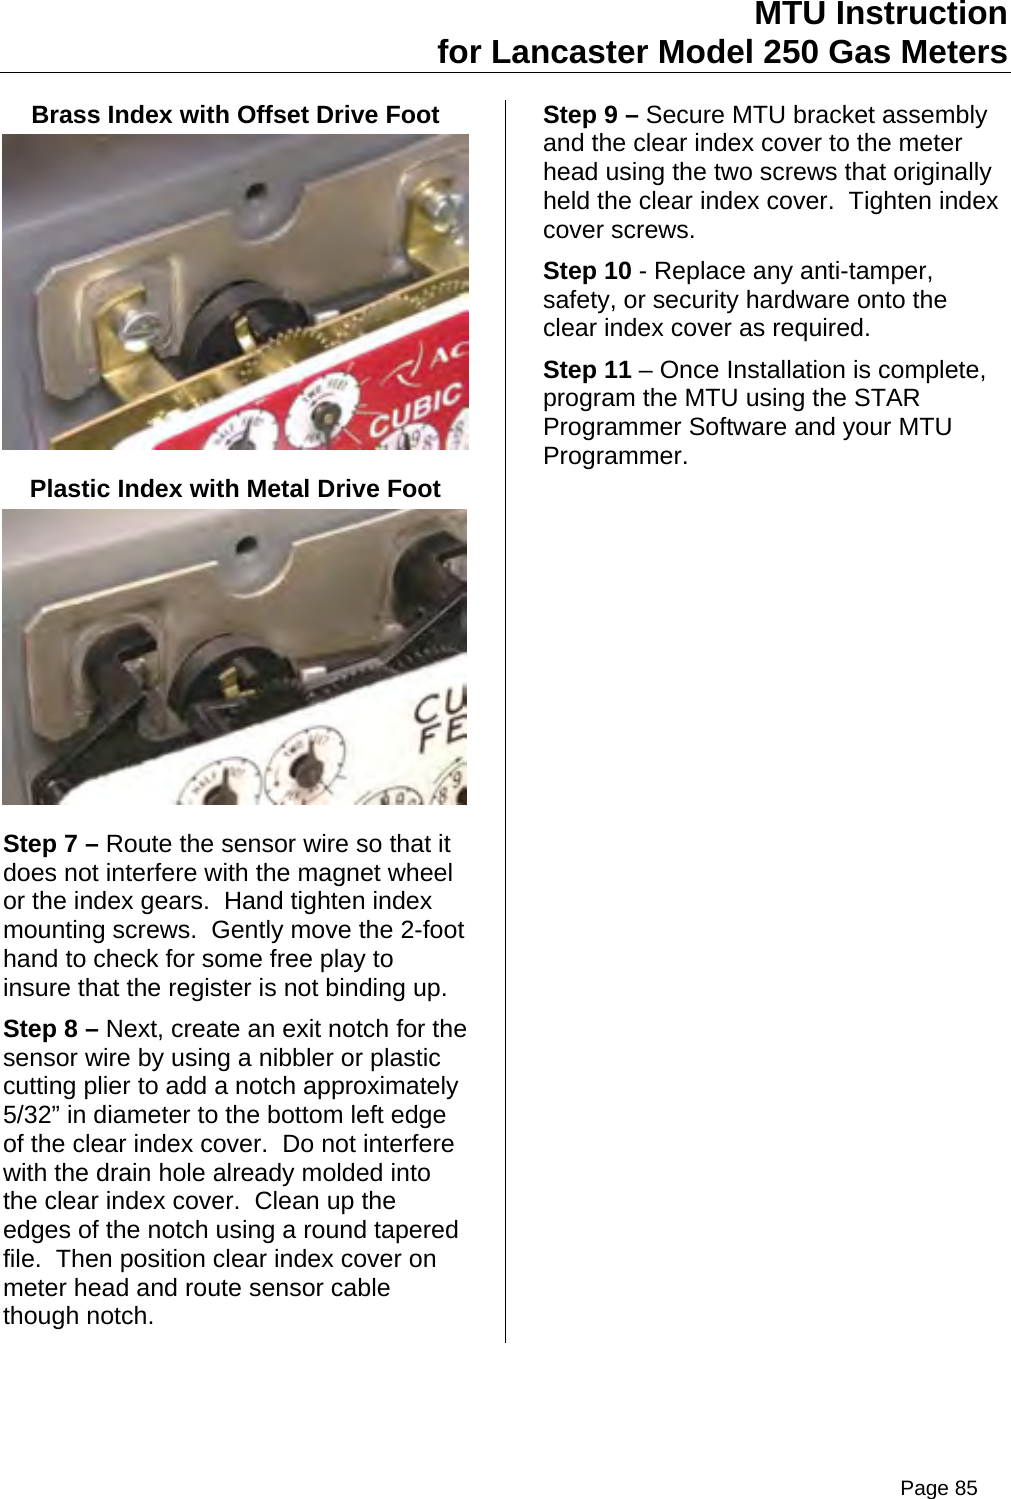 MTU Instruction for Lancaster Model 250 Gas Meters Brass Index with Offset Drive Foot  Plastic Index with Metal Drive Foot  Step 7 – Route the sensor wire so that it does not interfere with the magnet wheel or the index gears.  Hand tighten index mounting screws.  Gently move the 2-foot hand to check for some free play to insure that the register is not binding up. Step 8 – Next, create an exit notch for the sensor wire by using a nibbler or plastic cutting plier to add a notch approximately 5/32” in diameter to the bottom left edge of the clear index cover.  Do not interfere with the drain hole already molded into the clear index cover.  Clean up the edges of the notch using a round tapered file.  Then position clear index cover on meter head and route sensor cable though notch. Step 9 – Secure MTU bracket assembly and the clear index cover to the meter head using the two screws that originally held the clear index cover.  Tighten index cover screws. Step 10 - Replace any anti-tamper, safety, or security hardware onto the clear index cover as required. Step 11 – Once Installation is complete, program the MTU using the STAR Programmer Software and your MTU Programmer. Page 85